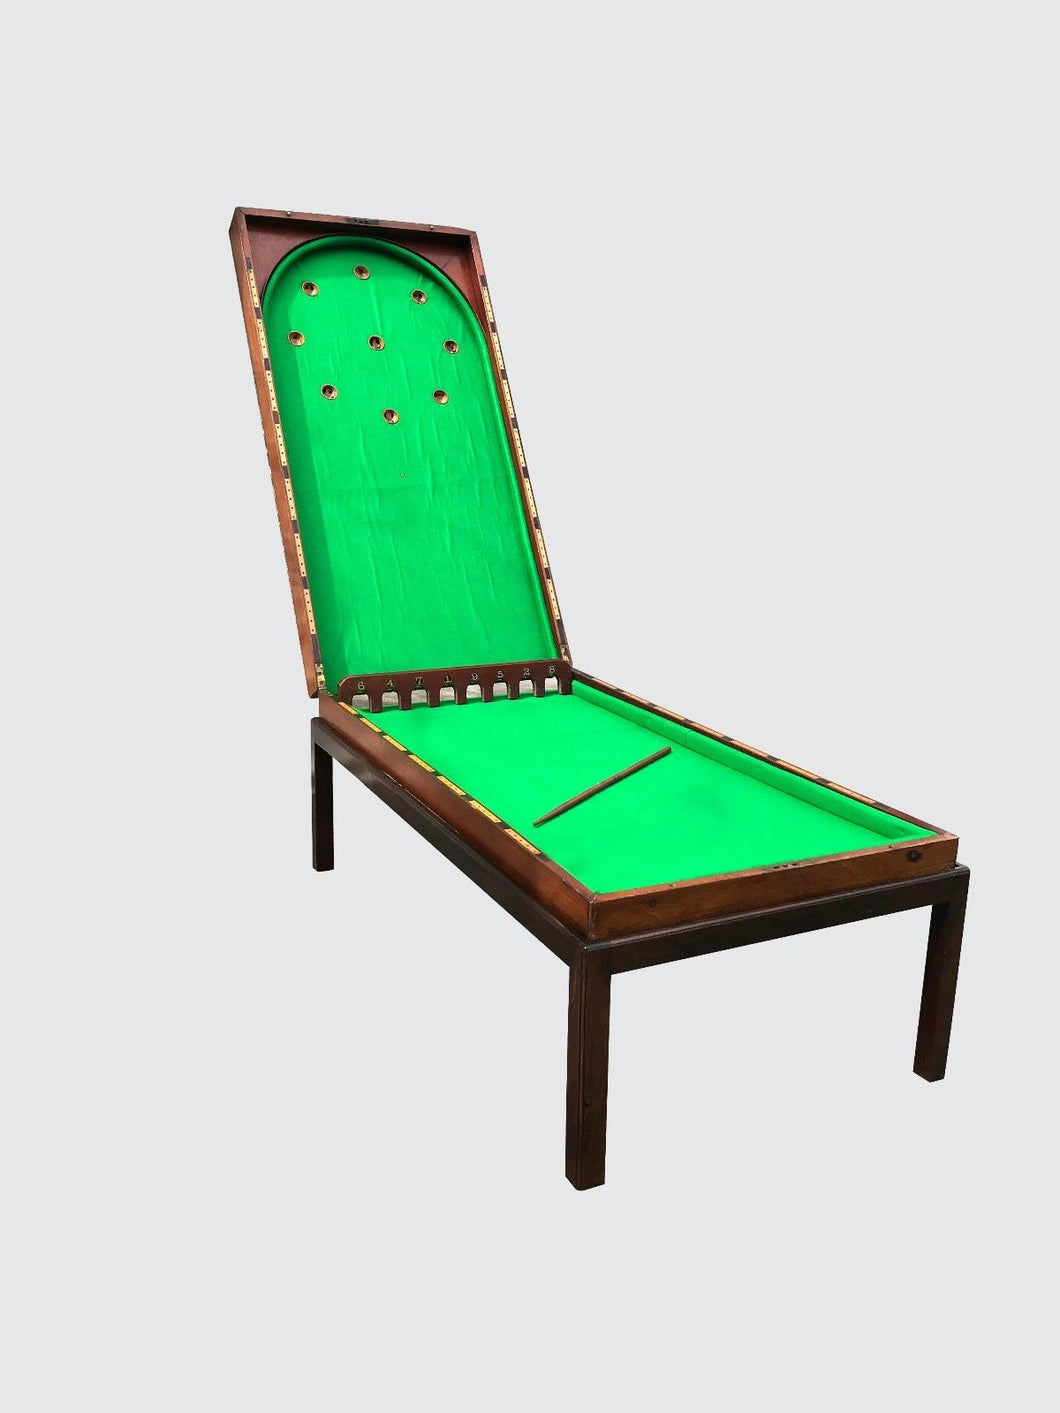 EXCEPTIONAL 19TH C MAHOGANY BAGATELLE PARLOR TABLE GAME ON FITTED FRAME